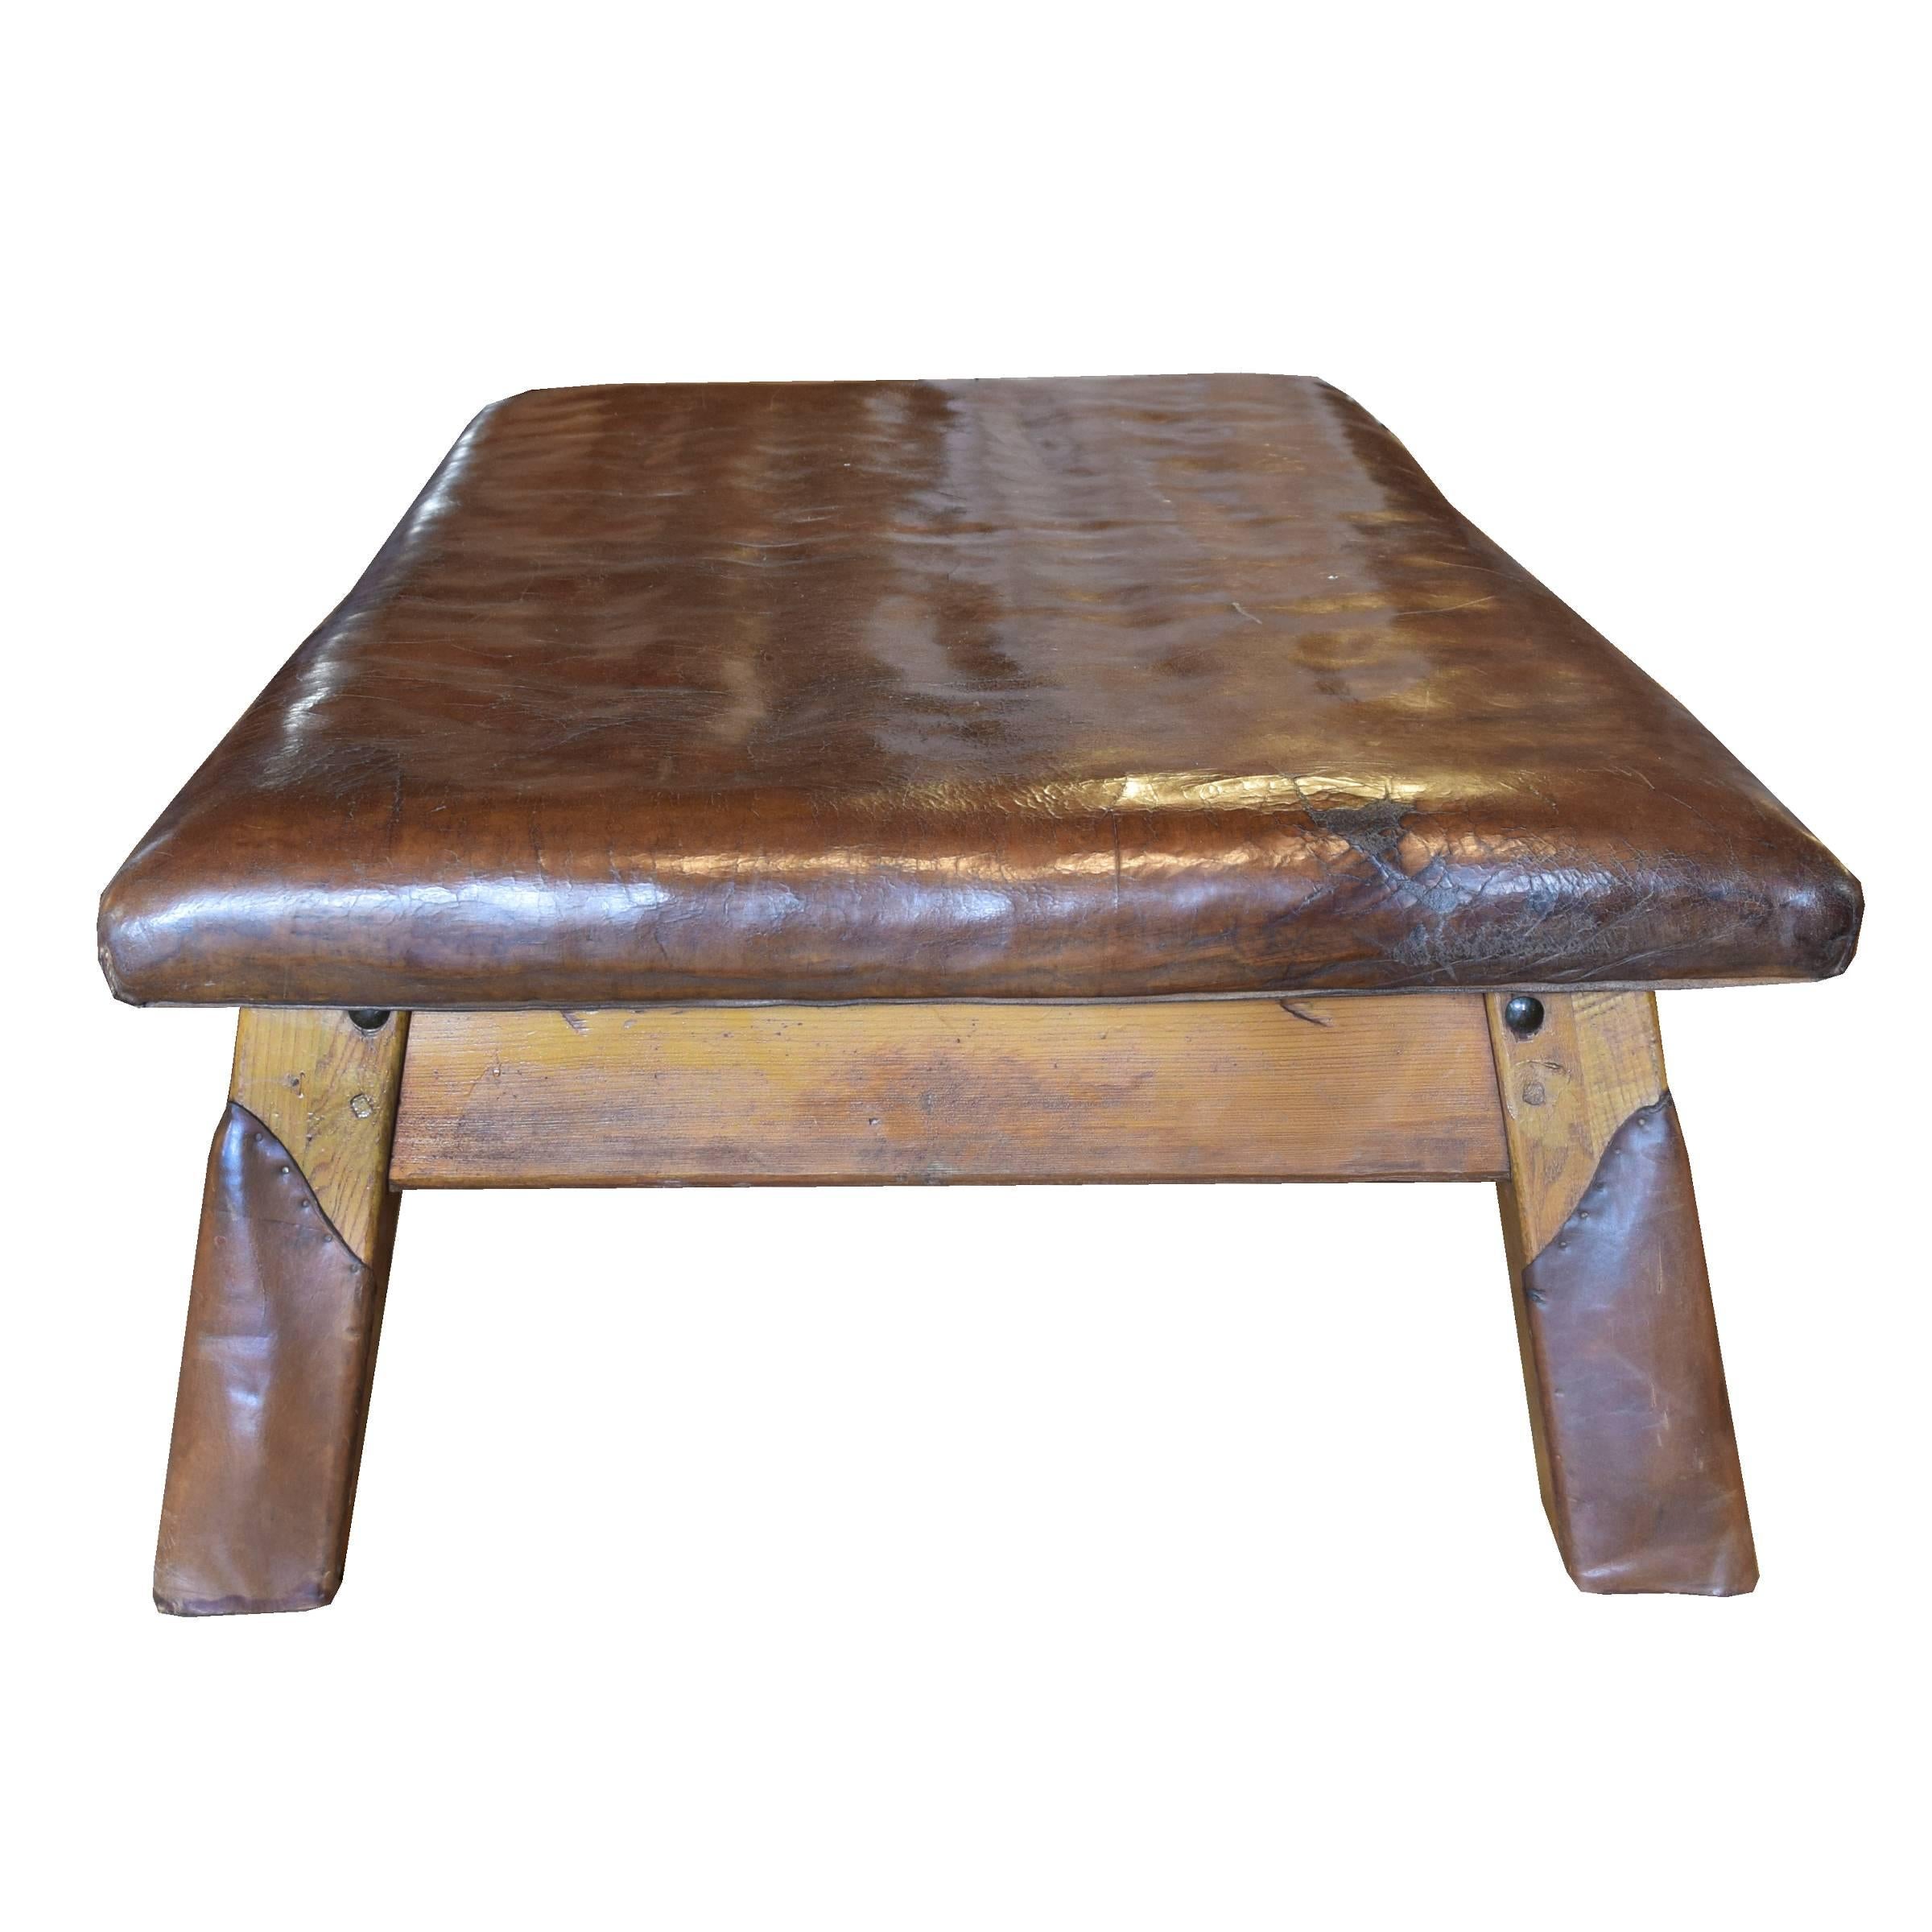 Czech Wood and Leather Vaulting Bench For Sale